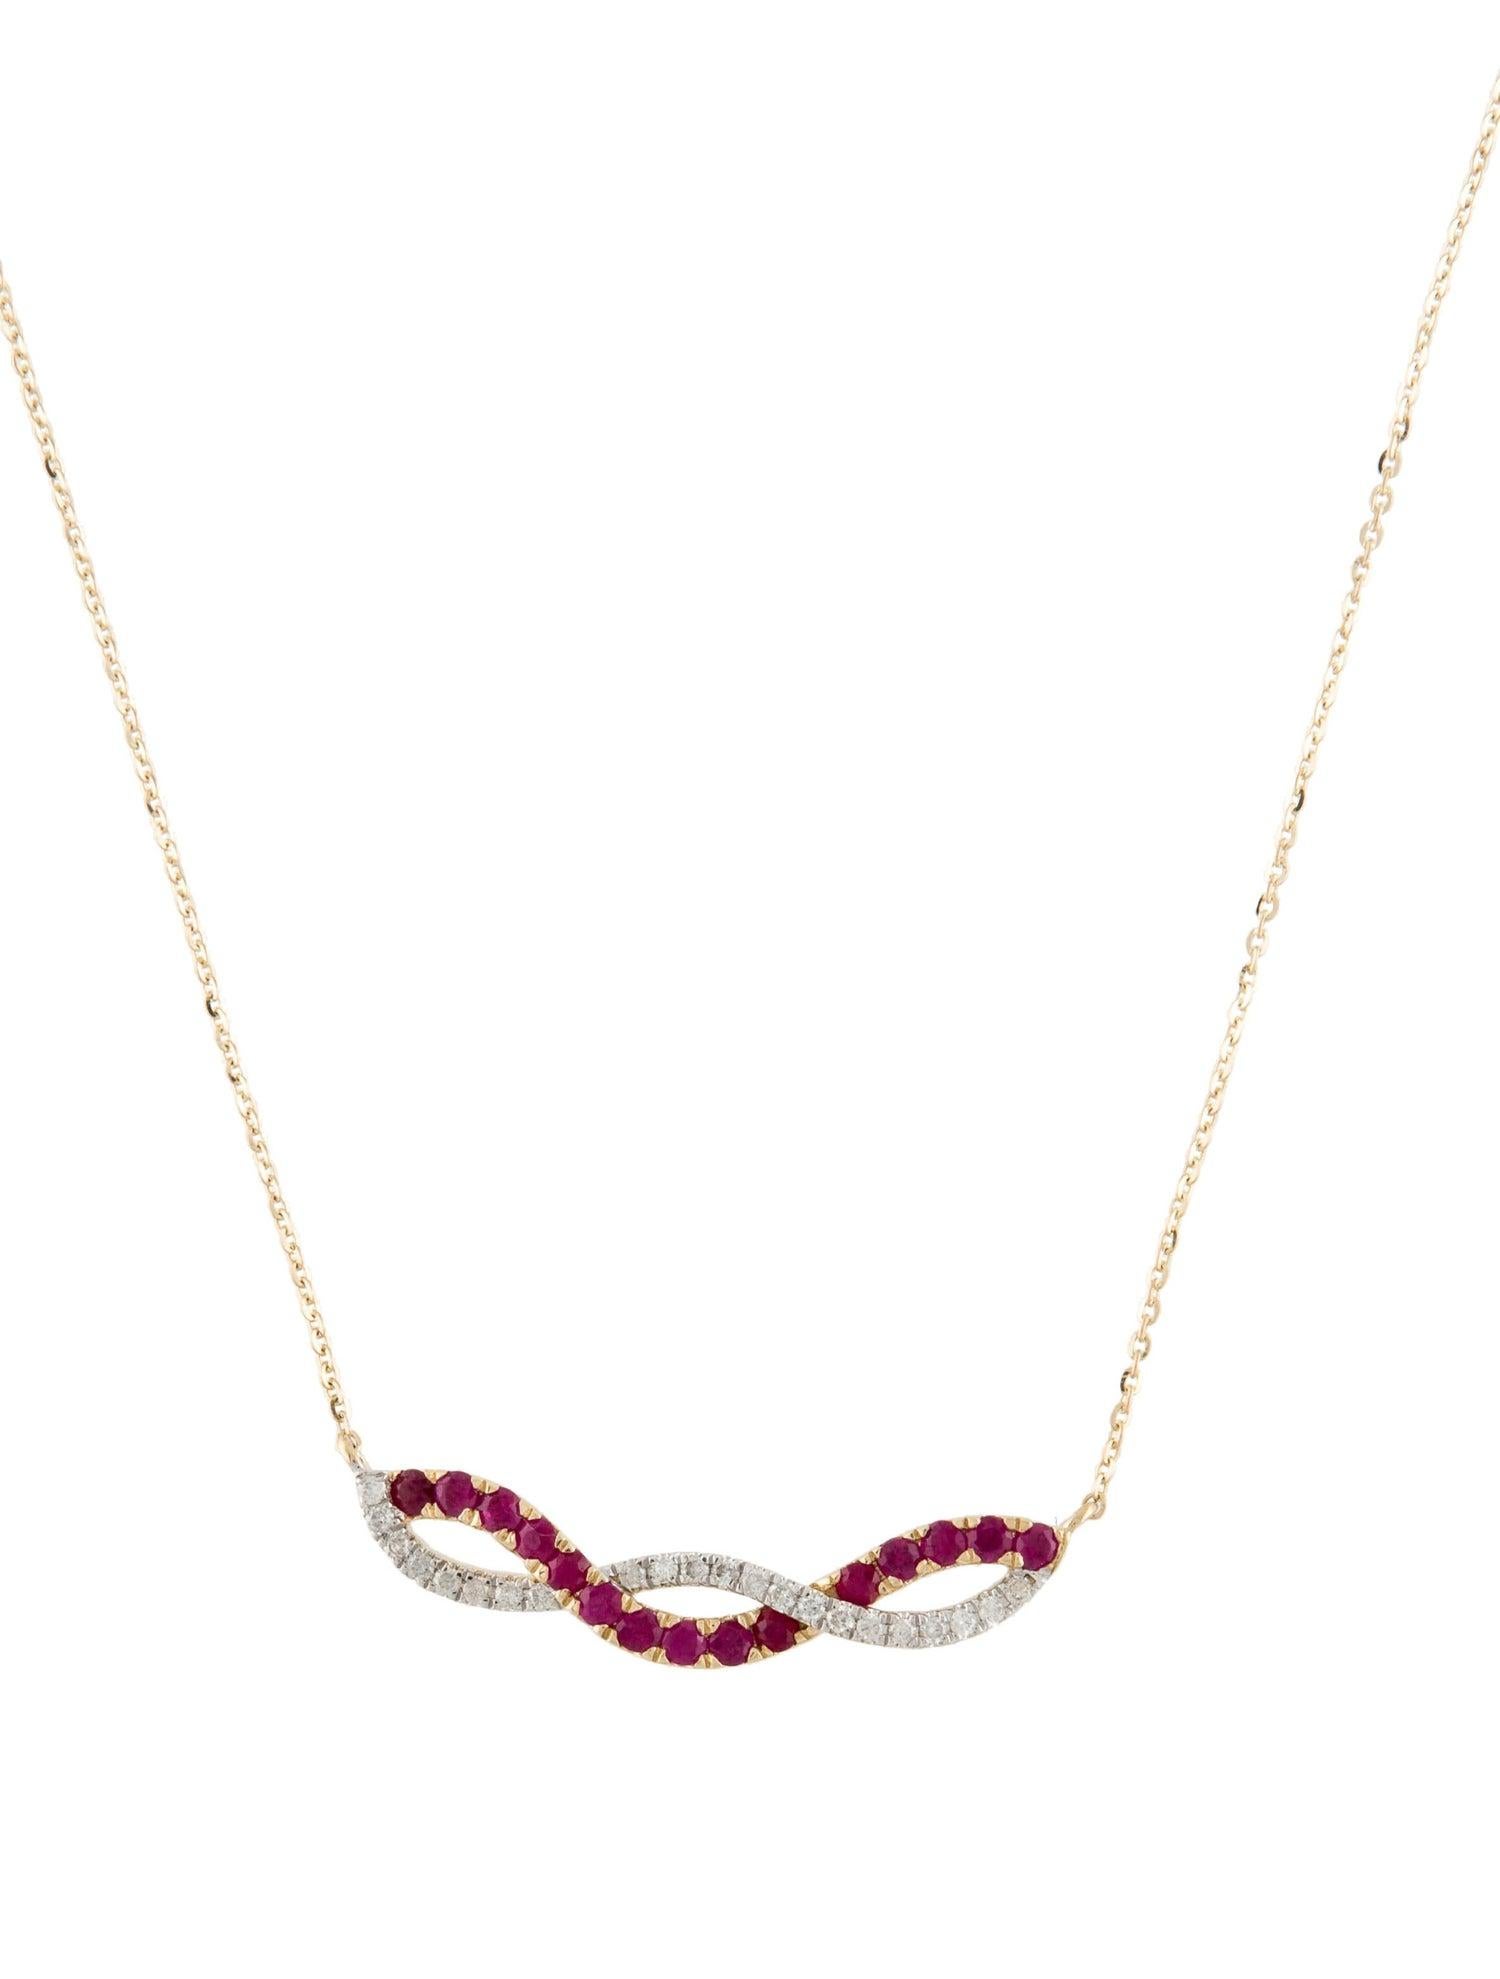 Indulge in the fiery embrace of passion with our Blooms of Passion Ruby and Diamond Necklace, an exquisite creation by Jeweltique. This captivating piece is a tribute to the fervent beauty of nature's blooms, entwined with the rich, crimson allure